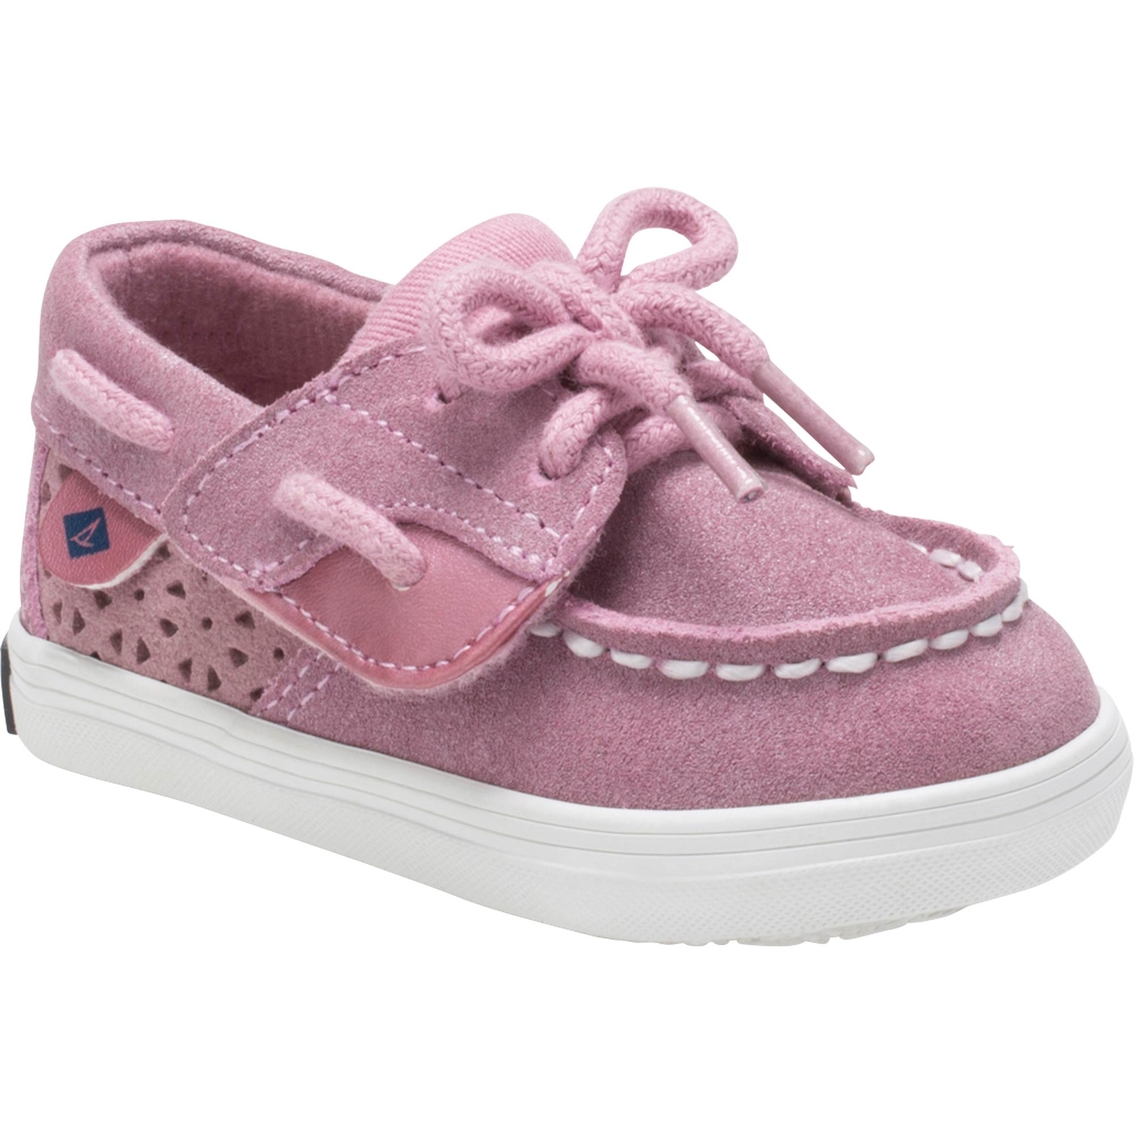 Sperry Infant Girls Crib Bluefish Boat Shoes | Sneakers | Shoes | Shop ...